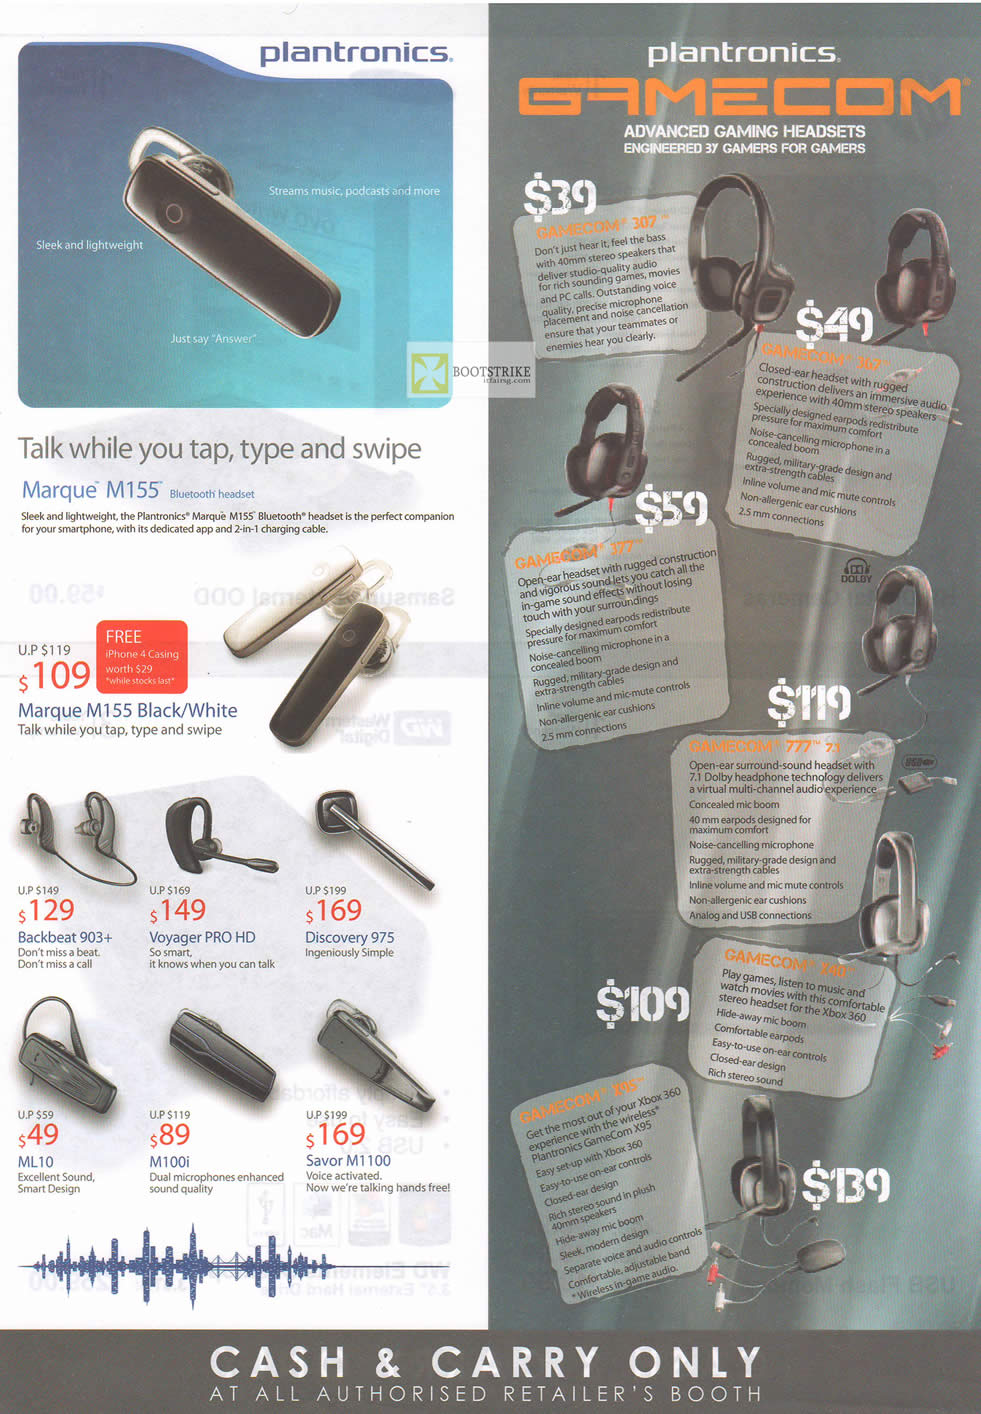 IT SHOW 2012 price list image brochure of Plantronics Marque M155 Bluetooth Headset, Gamecom Headset 307, 367, 377, 777, BackBeat 903, Voyager Pro HD, Discovery 975, ML10, M100i, Savor M1100